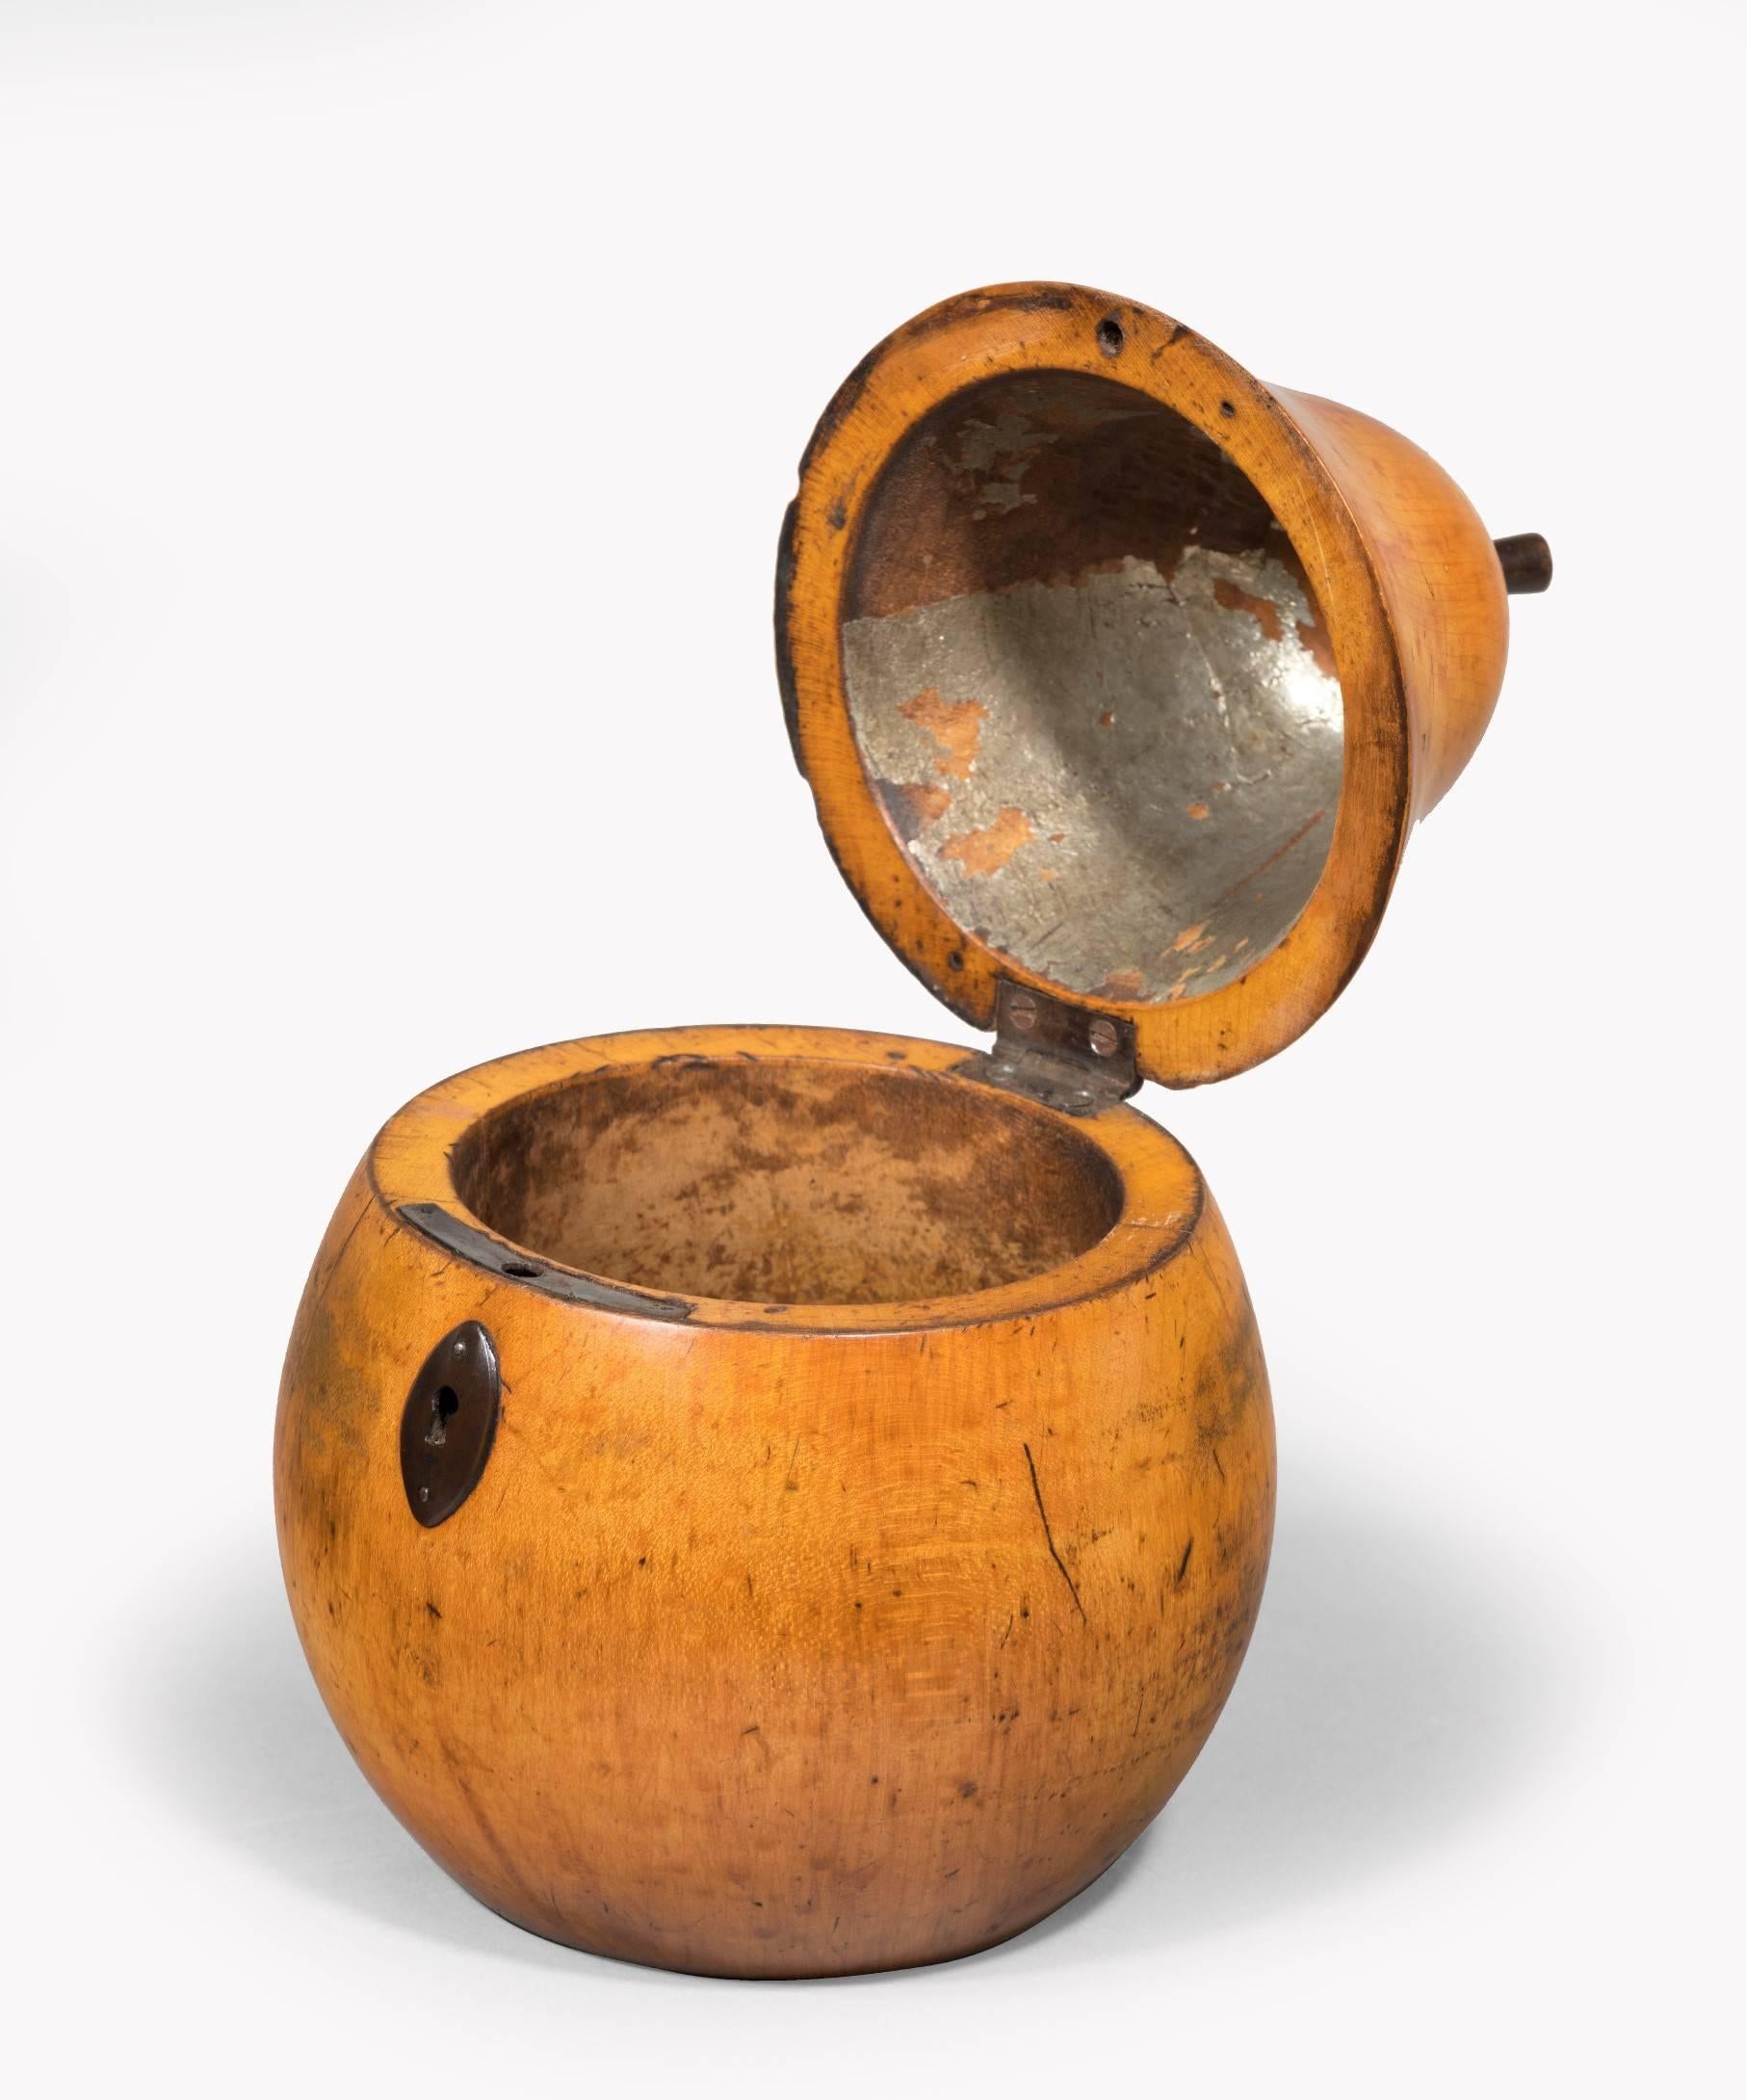 A rare Georgian fruitwood treen tea caddy modelled in the form of a pear; the pear's carved stalk can be used to open the lid which opens to reveal some of the original foil lining; having a steel escutcheon and a good colour.

Fruit tea caddies